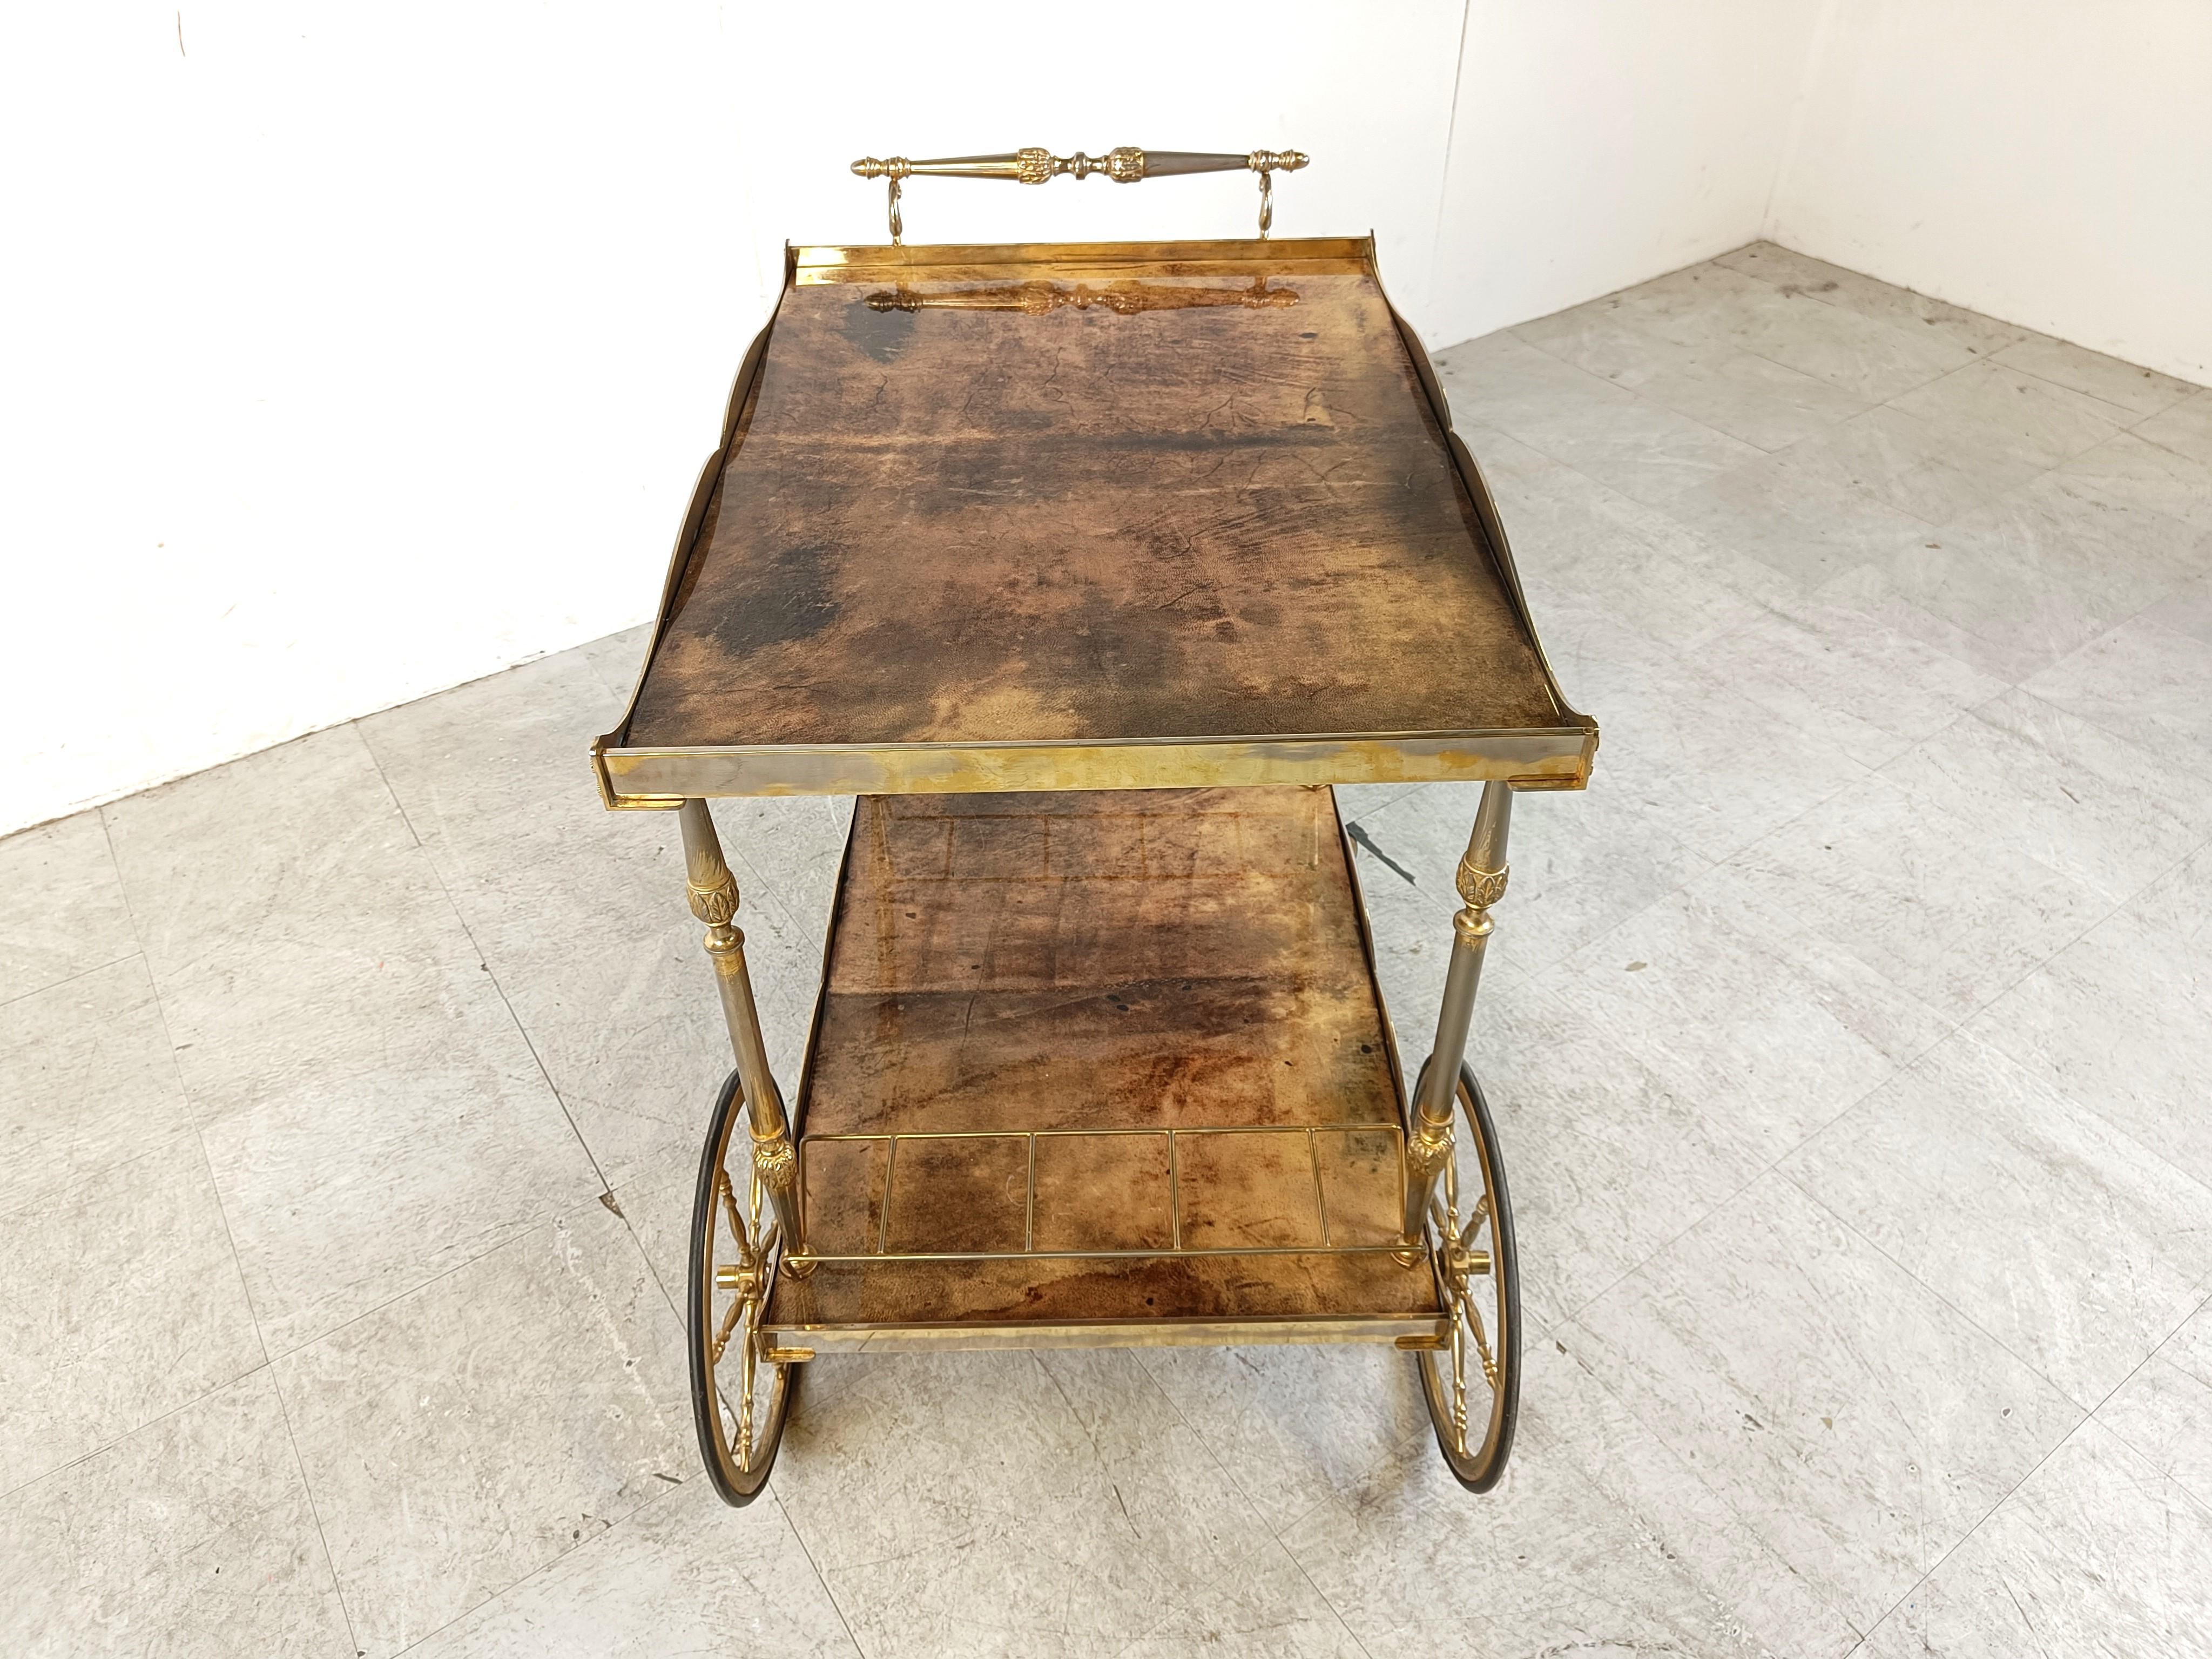 Very unique Aldo Tura Goatskin or parchment bar cart. This bar cart was made in Italy in the 1960s. 

Constructed of thickly lacquered goatskin / parchment and gilt metal hardware. 

Perfect bar or serving cart, or as rolling storage in an